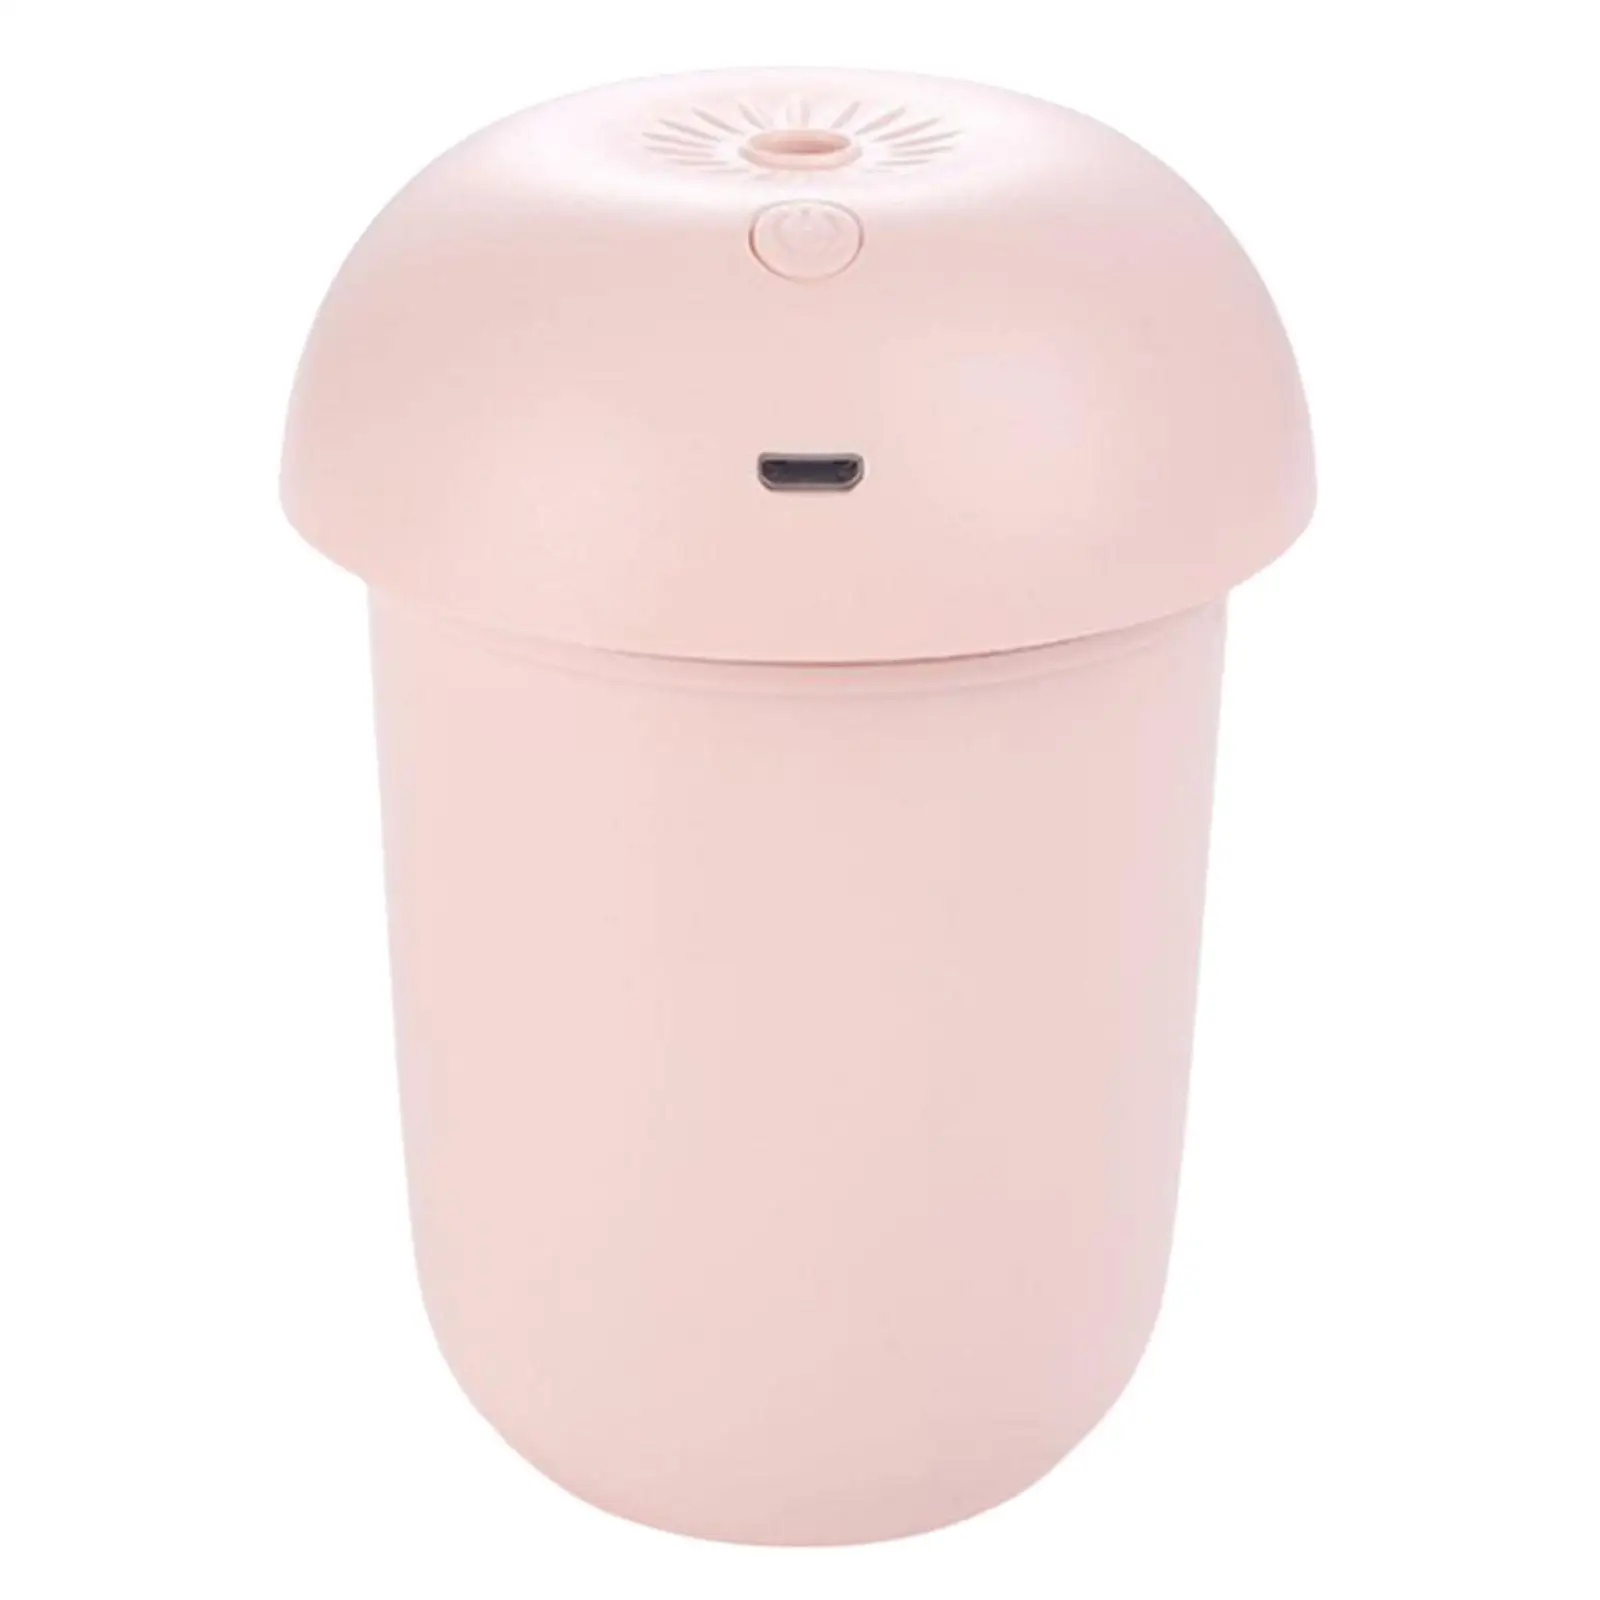 Mini USB Mushroom Humidifier Quite Oil Aroma Aromatherapy Diffuser Night Light 180ml for Baby Room Home Pink Air Fresher Travel